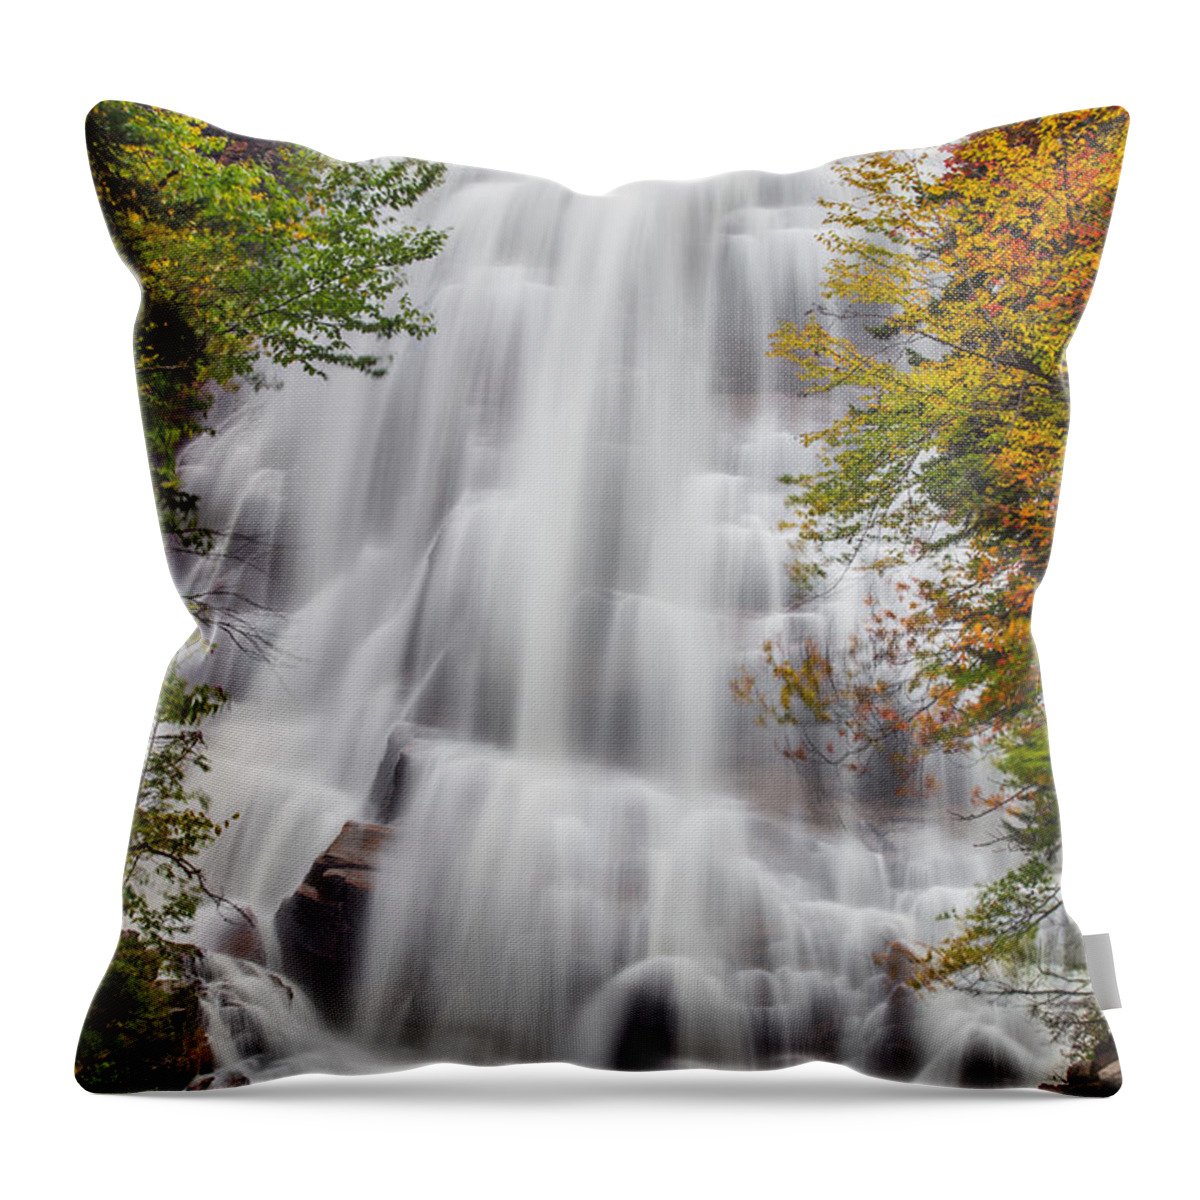 Arethusa Throw Pillow featuring the photograph Arethusa Falls by White Mountain Images